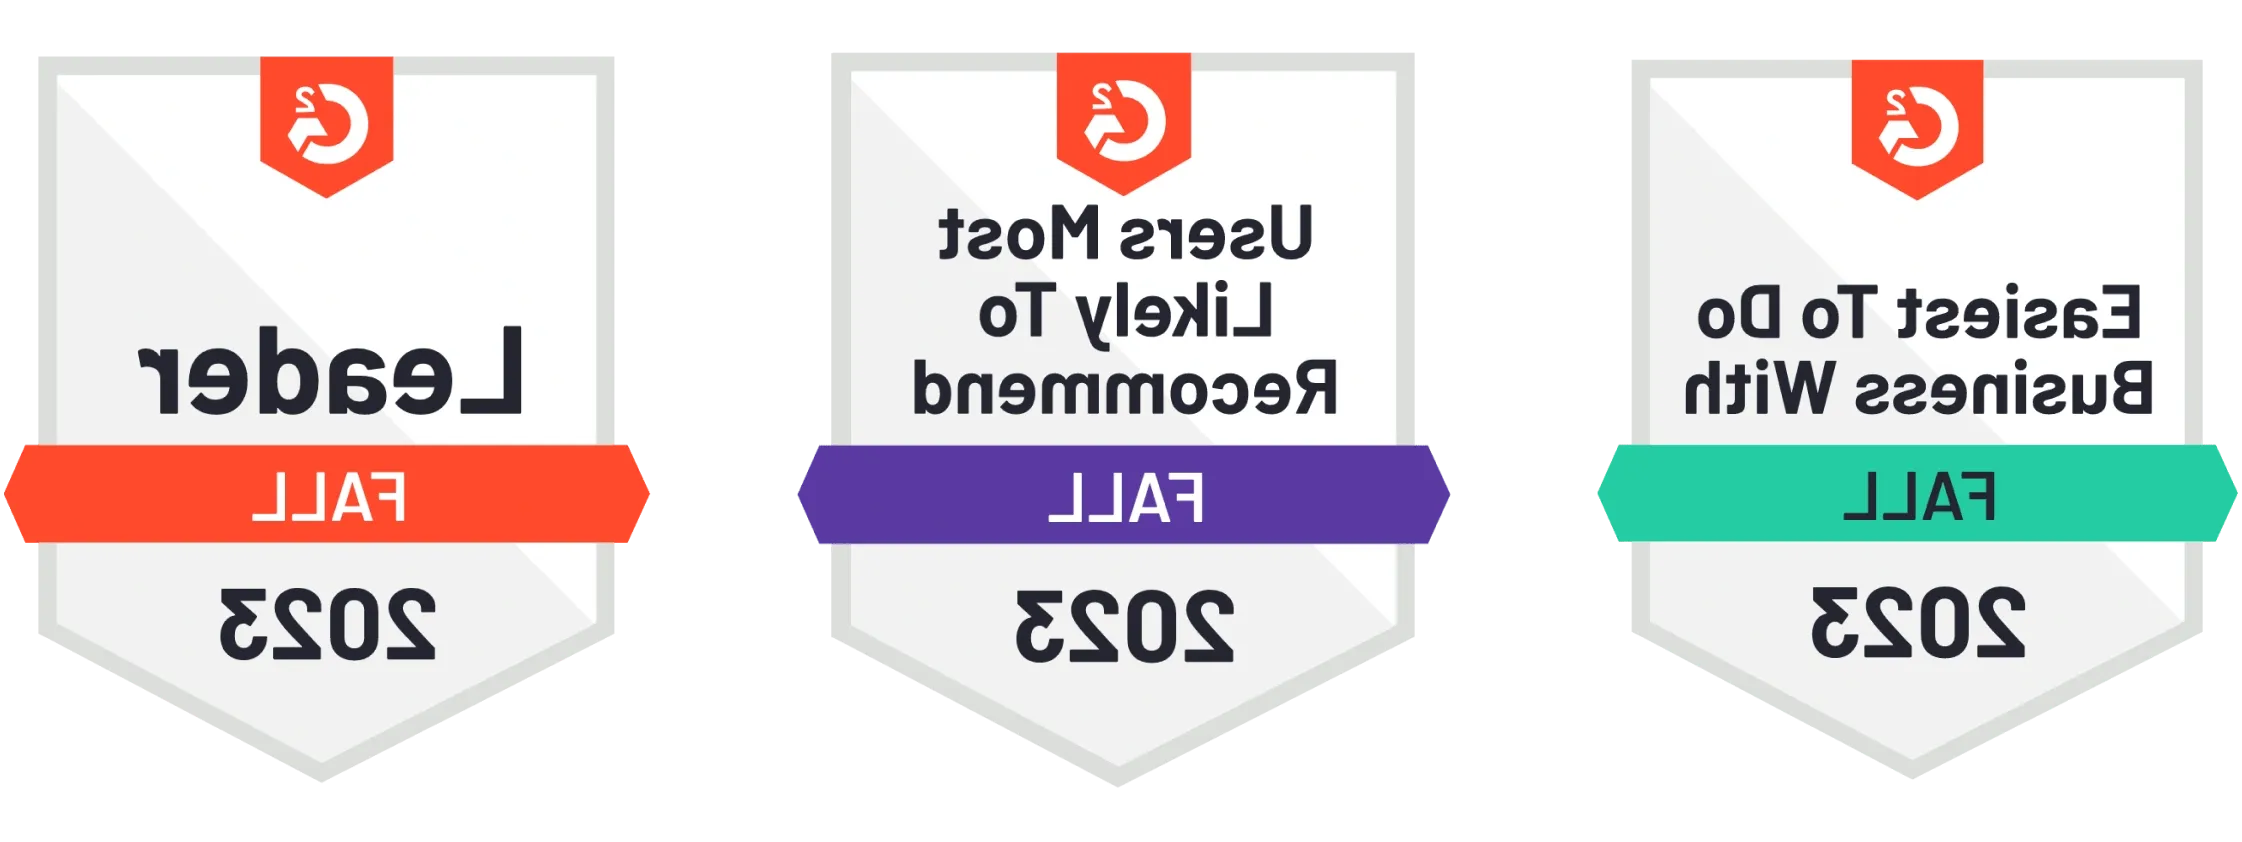 GDPR, ISO:27001, and G2 badges icons.>
      </div>
      <p class=